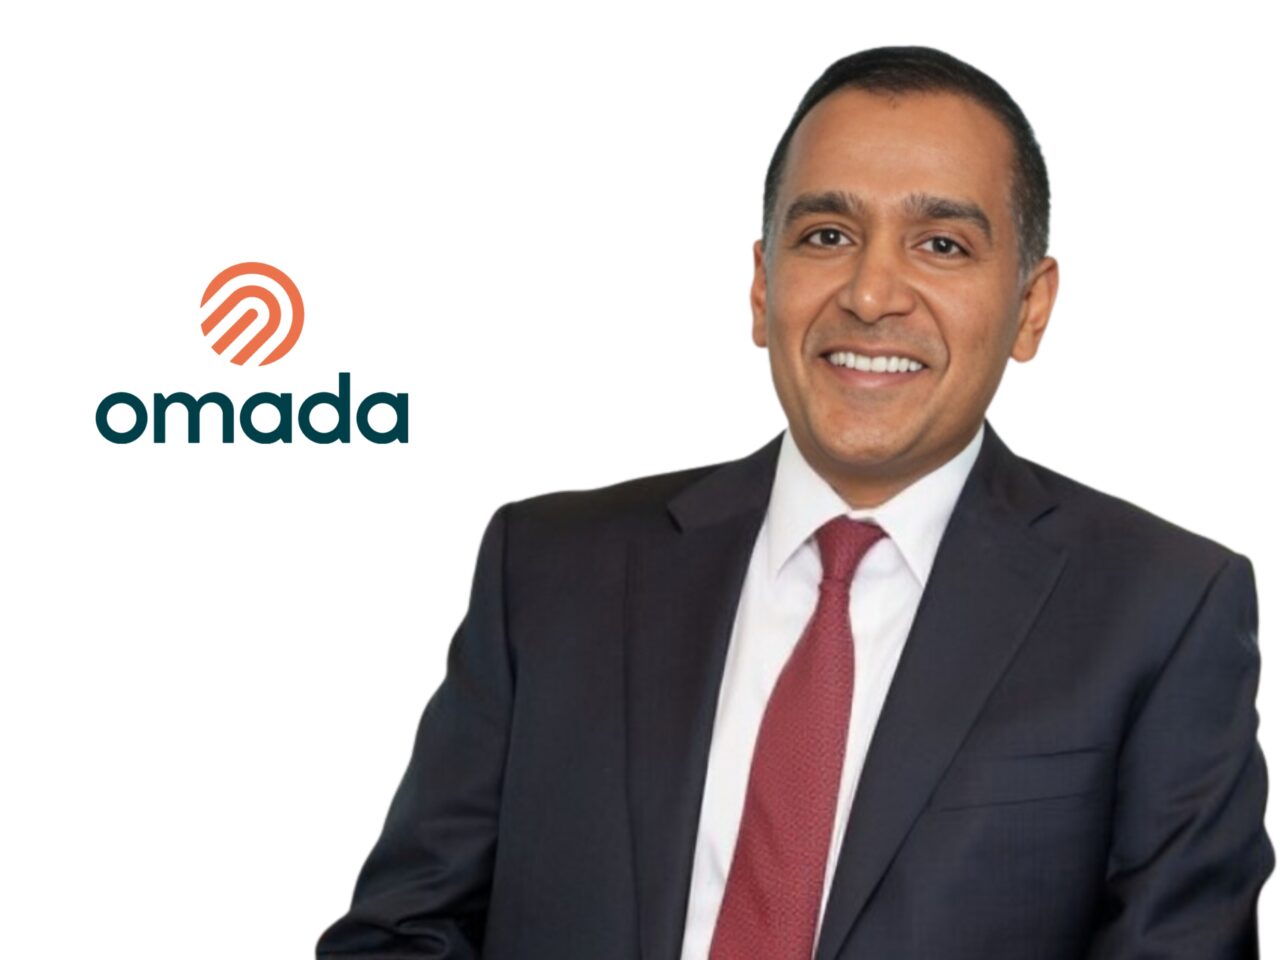 Sachin H. Jain: I’m excited to share that I’m joining the board of Omada Health